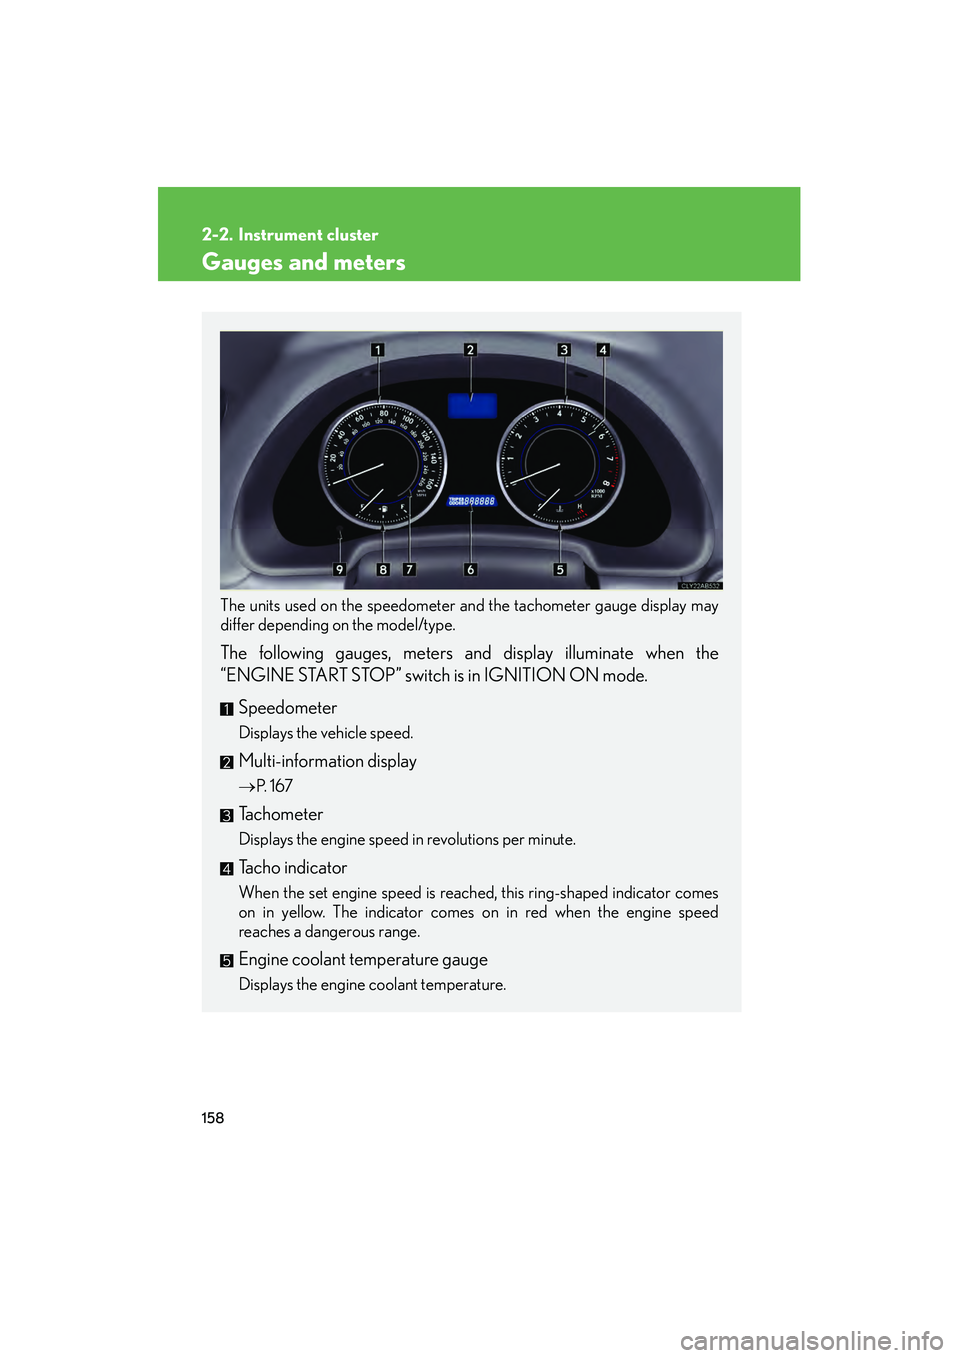 Lexus IS250 2012  Owners Manual 158
IS350/250_U
2-2. Instrument cluster
Gauges and meters
The units used on the speedometer and the tachometer gauge display may
differ depending on the model/type.
 
The following gauges, meters and 